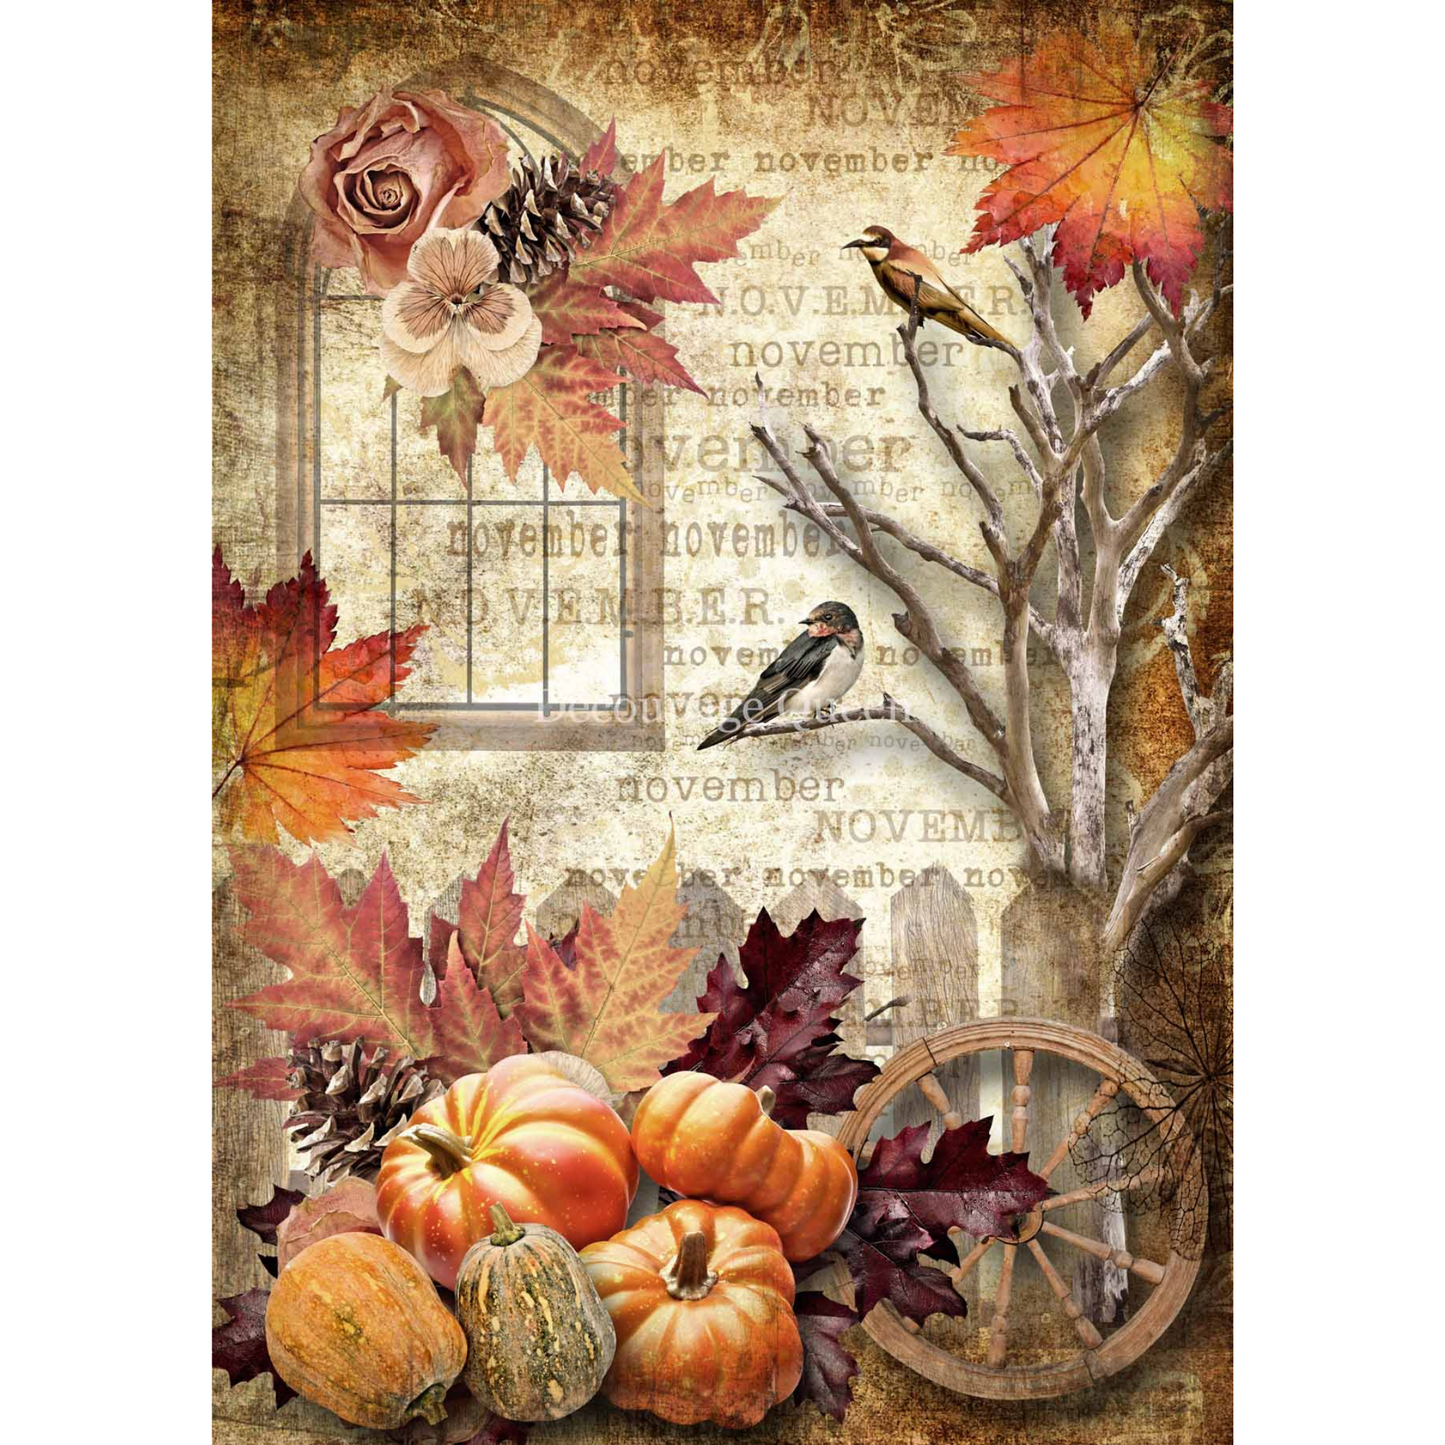 "November" decoupage rice paper by Decoupage Queen available at Milton's Daughter